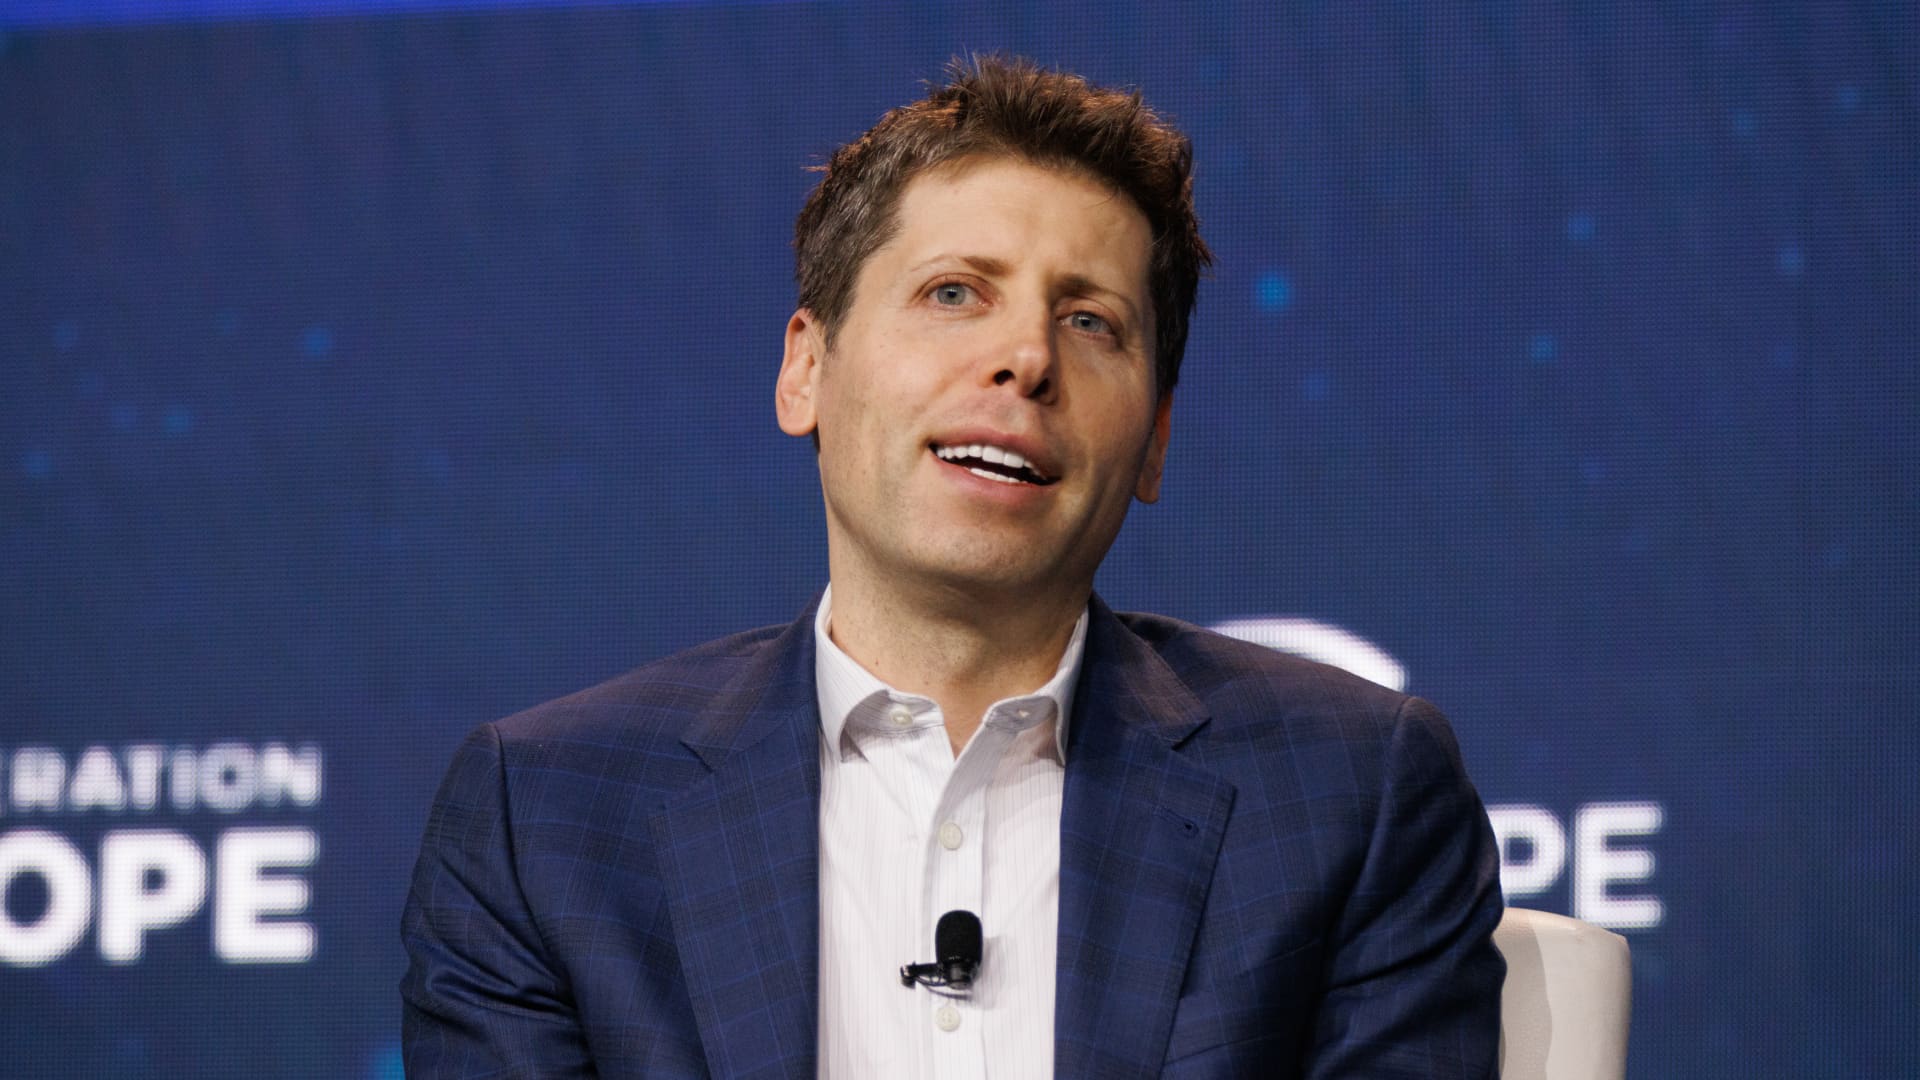 ChatGPT is particularly useful for people in these 3 industries, says OpenAI CEO Sam Altman